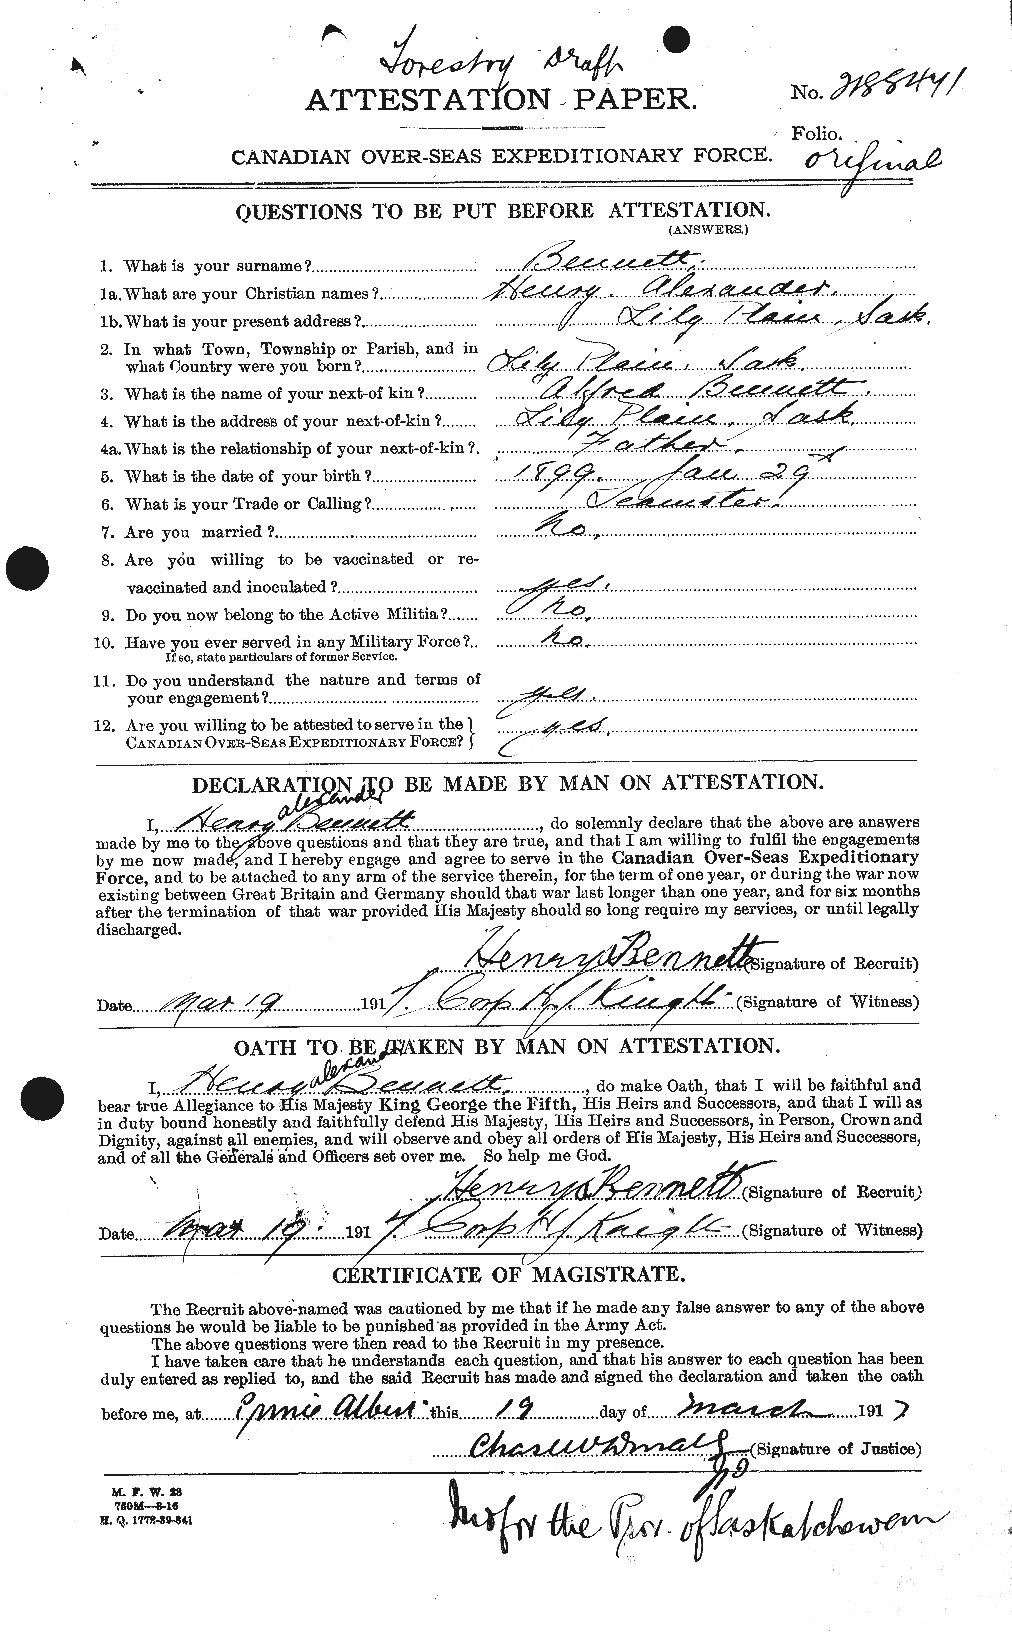 Personnel Records of the First World War - CEF 238480a